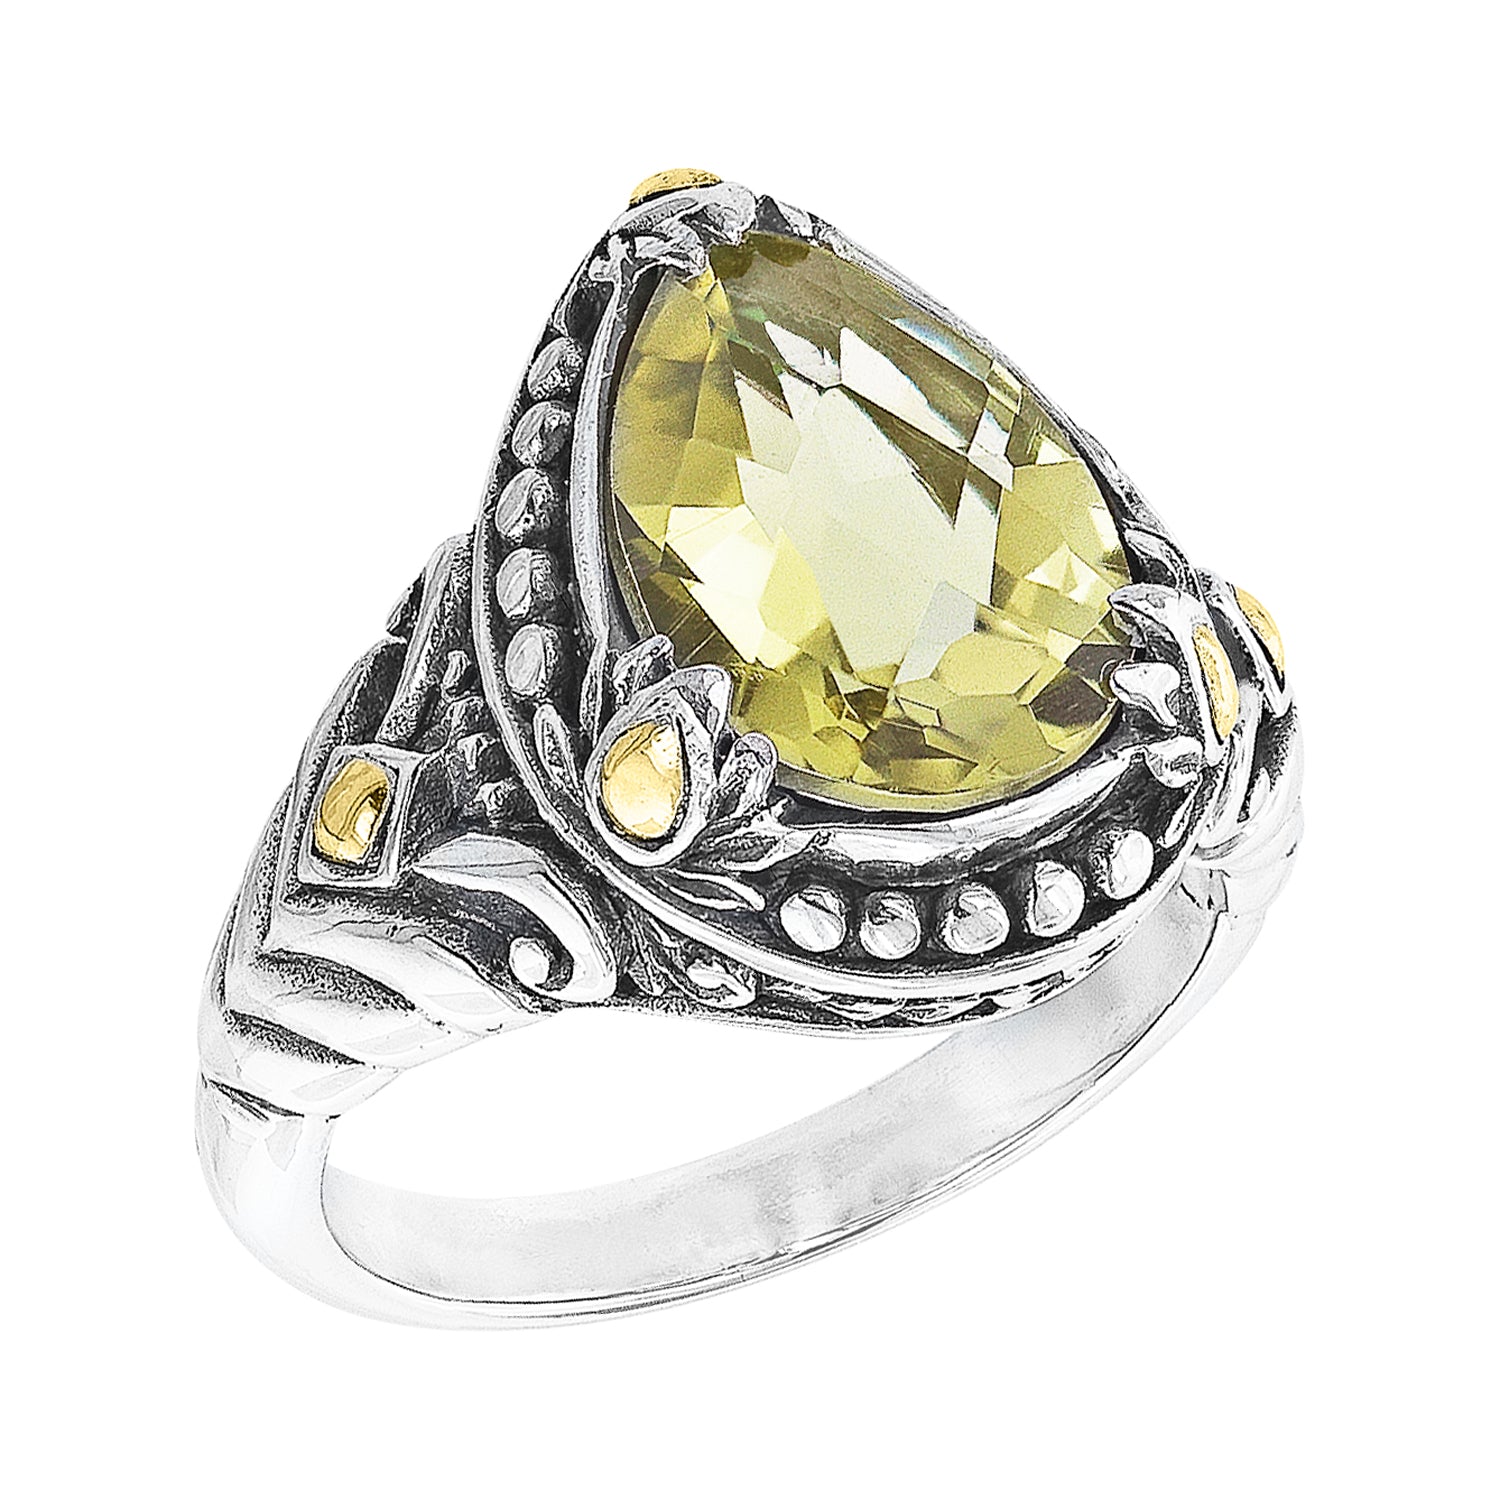 Bali Sterling Silver Pear Shaped Lemon Quartz Ring with Lotus Flower and 18K Gold Accents